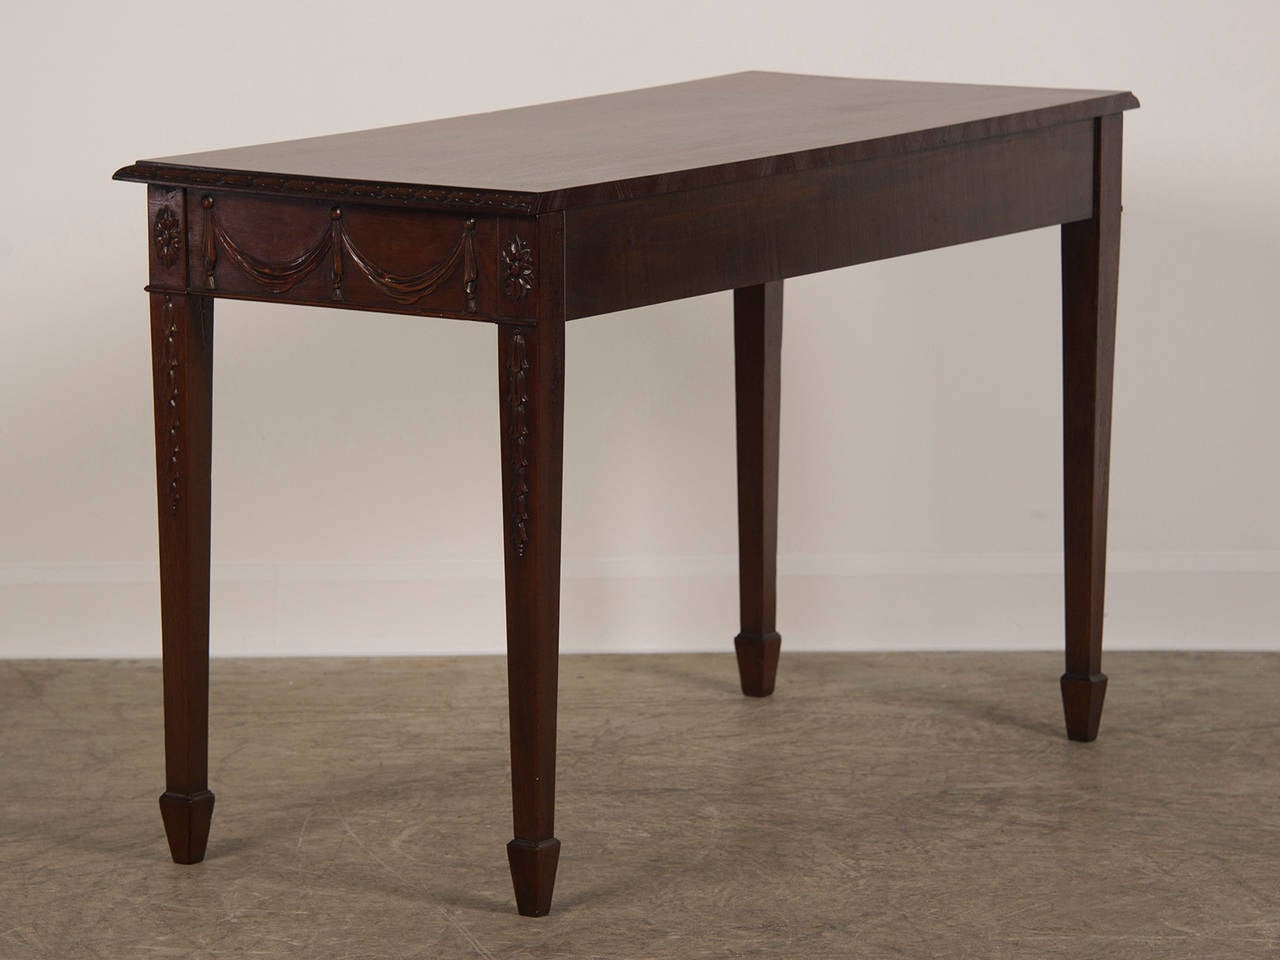 Mid-19th Century Pair of Adam Style Carved Mahogany Console / Serving Tables, England, circa 1850